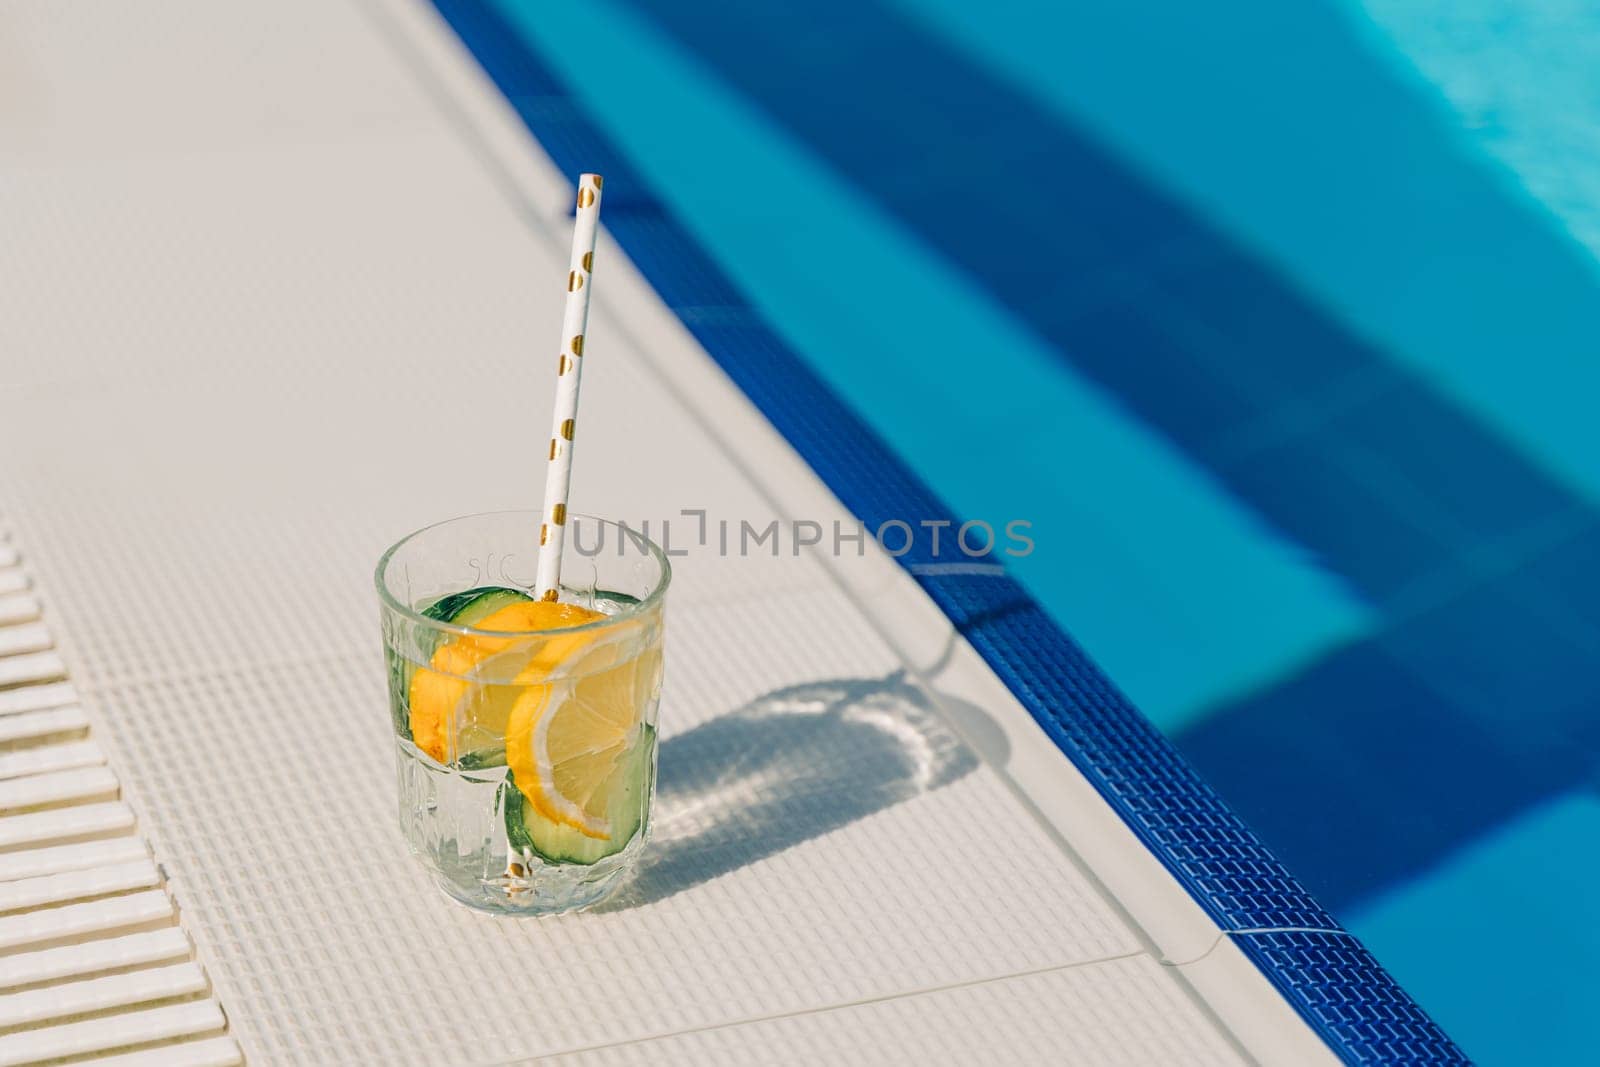 Tropical sparkling cocktail by the pool. The picture of glass with lemon and cucumber lemonade fruit cocktail standing near the poolside. Summer alcohol free drink. Hello summer holiday vacation